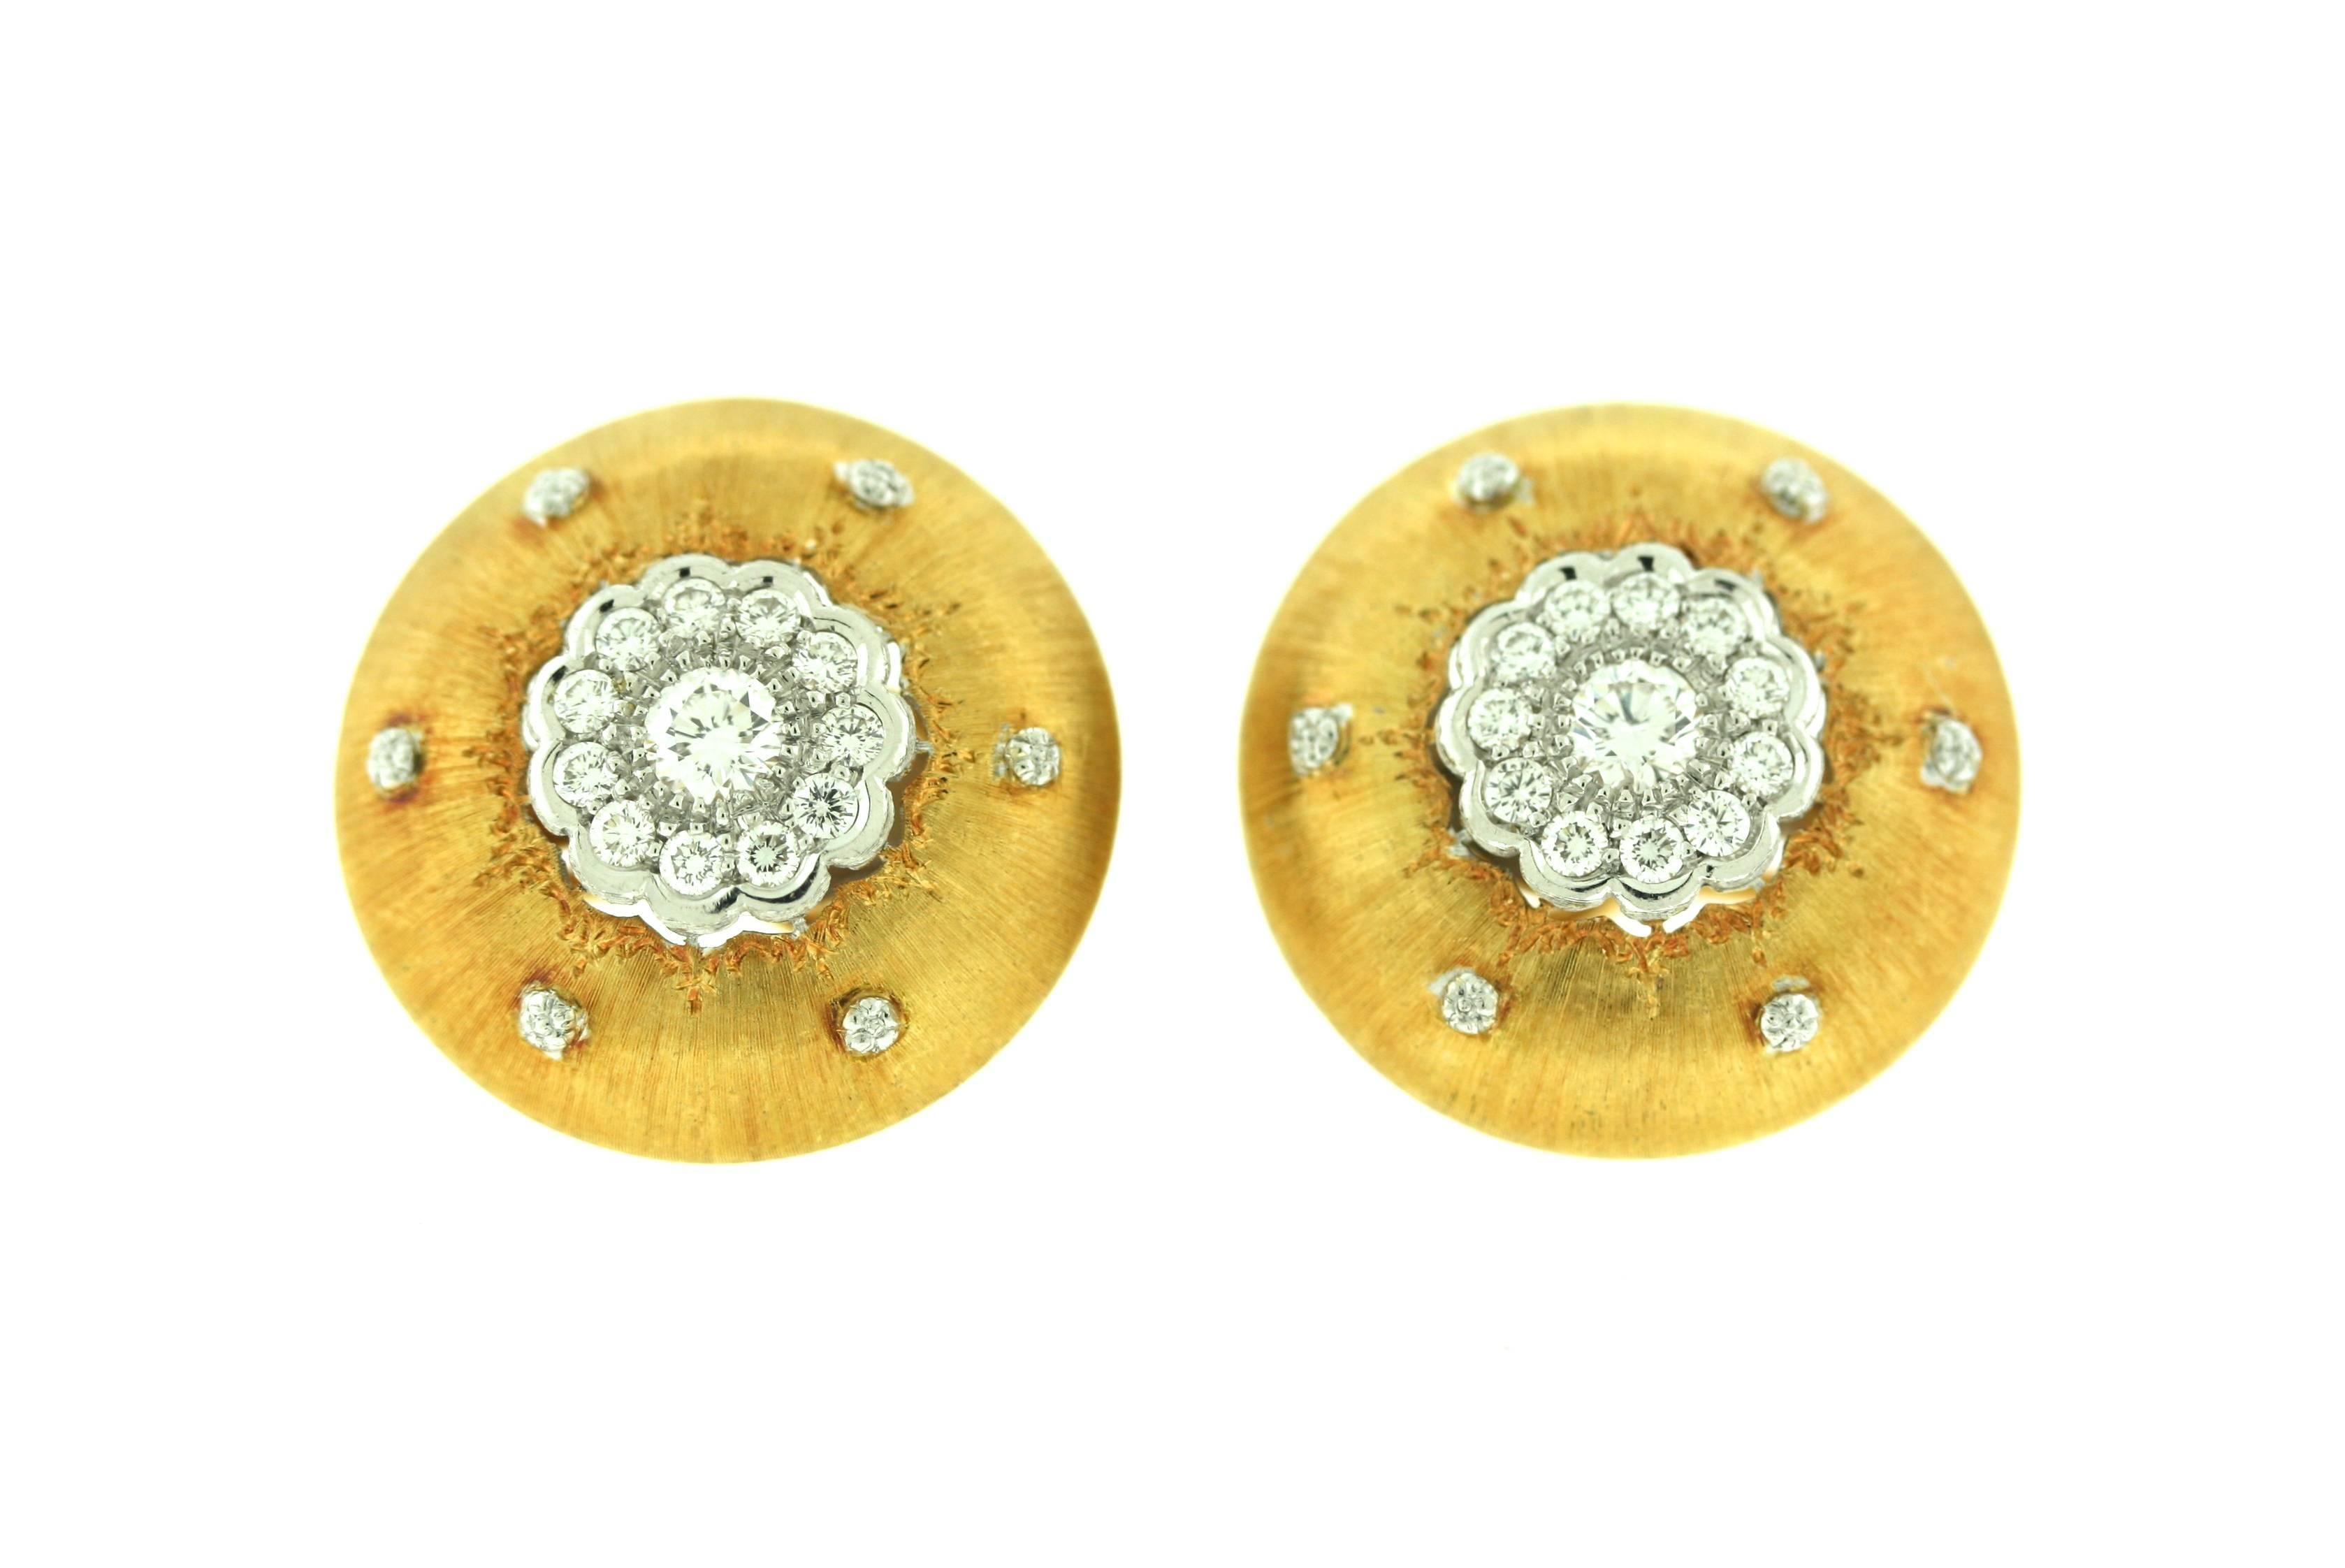 Buccellati 18k gold hand tooled and engraved large button earrings with diamond center medallions of a floral motif surrounded by six smaller diamond accents. Signed Buccellati with maker's mark and gold mark. 
